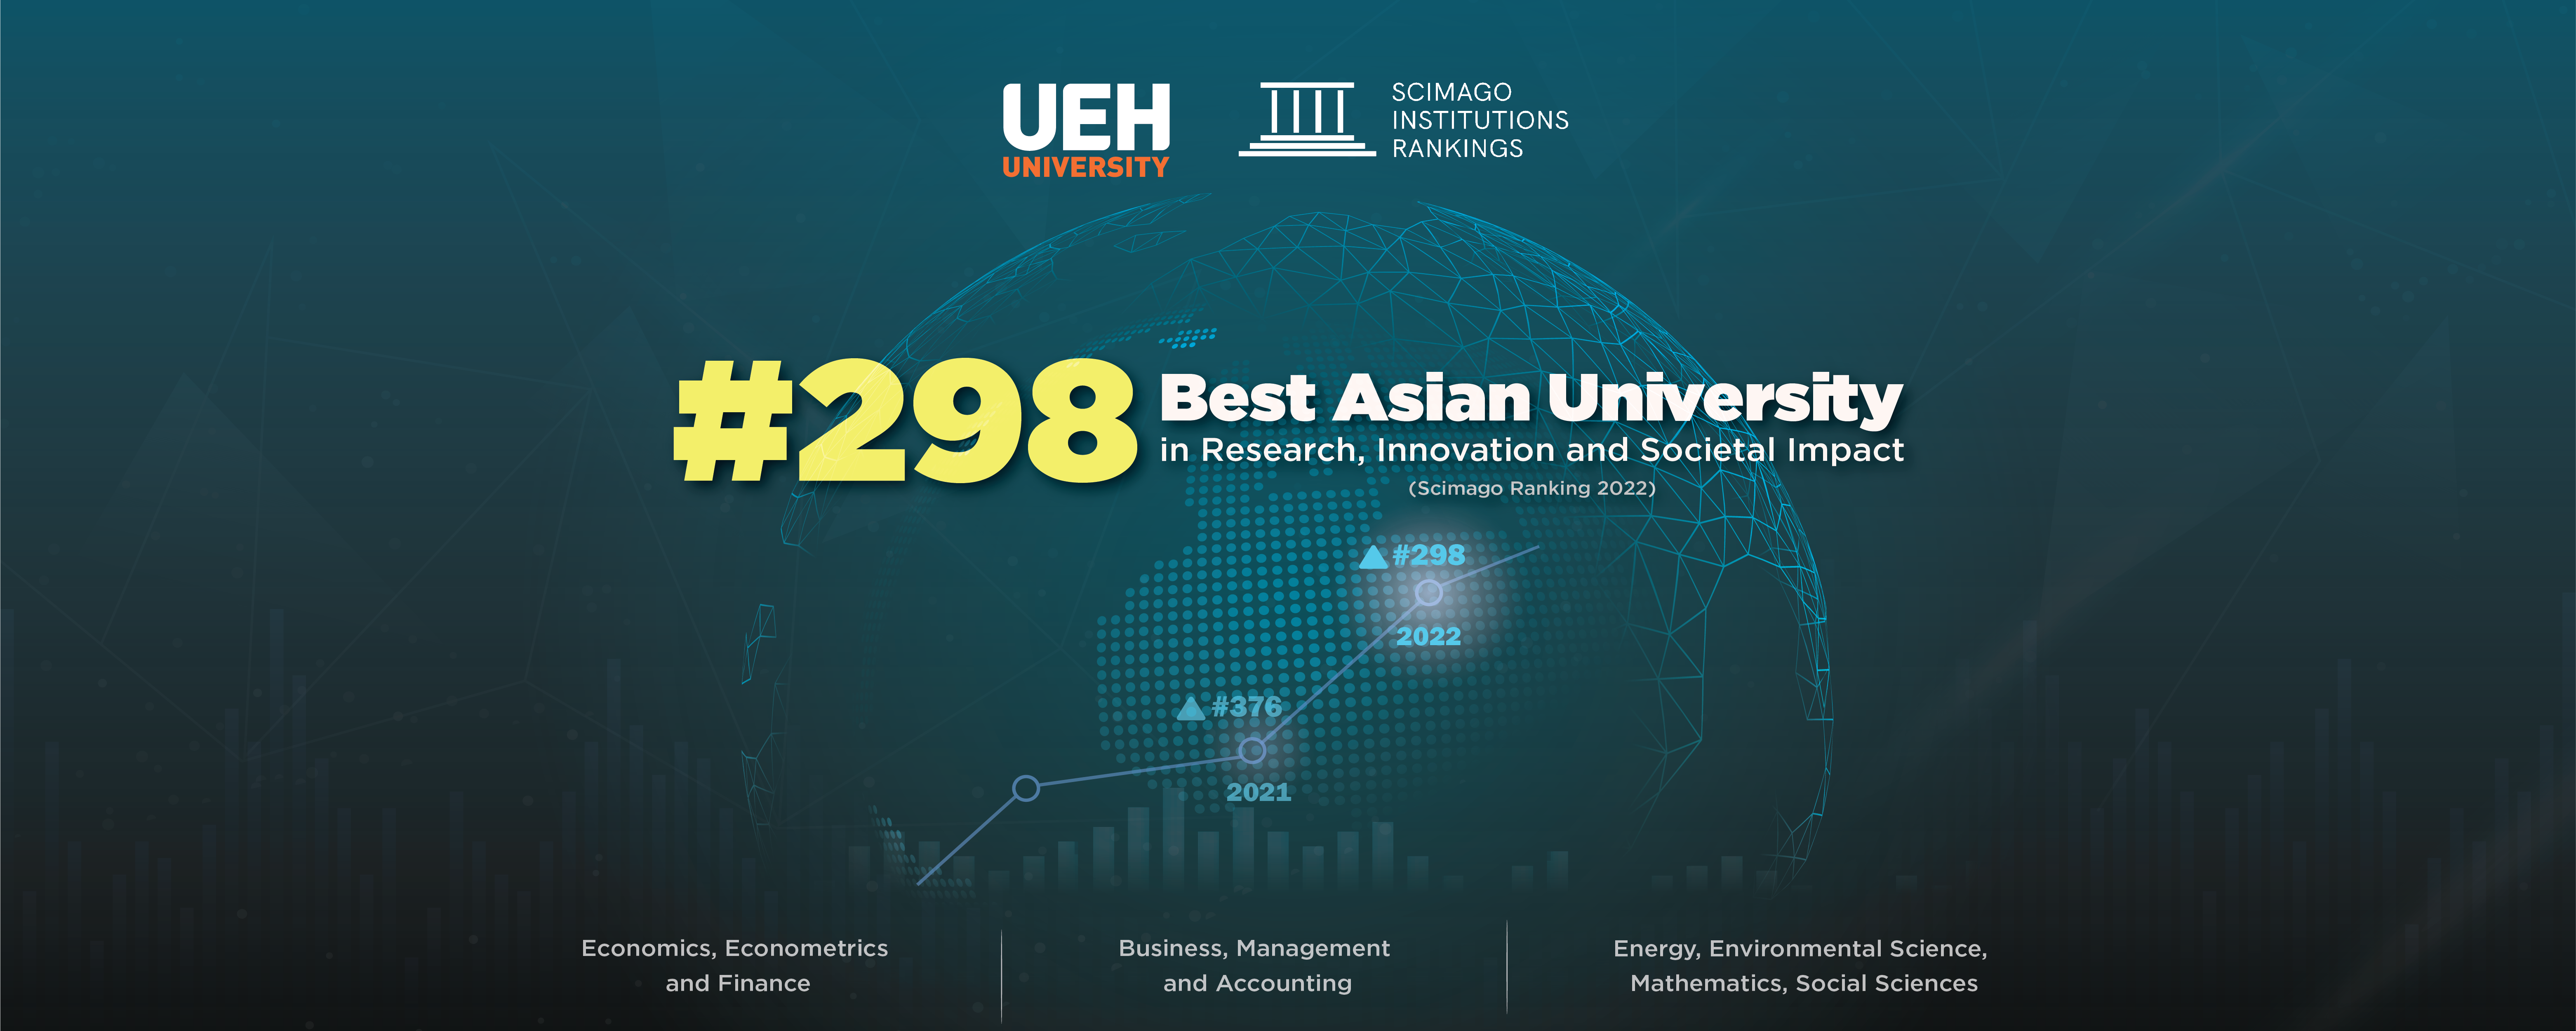 UEH arising 78 places in the International ranking of Research institutions (SCImago), entering the Top 298 Best Universities in Asia